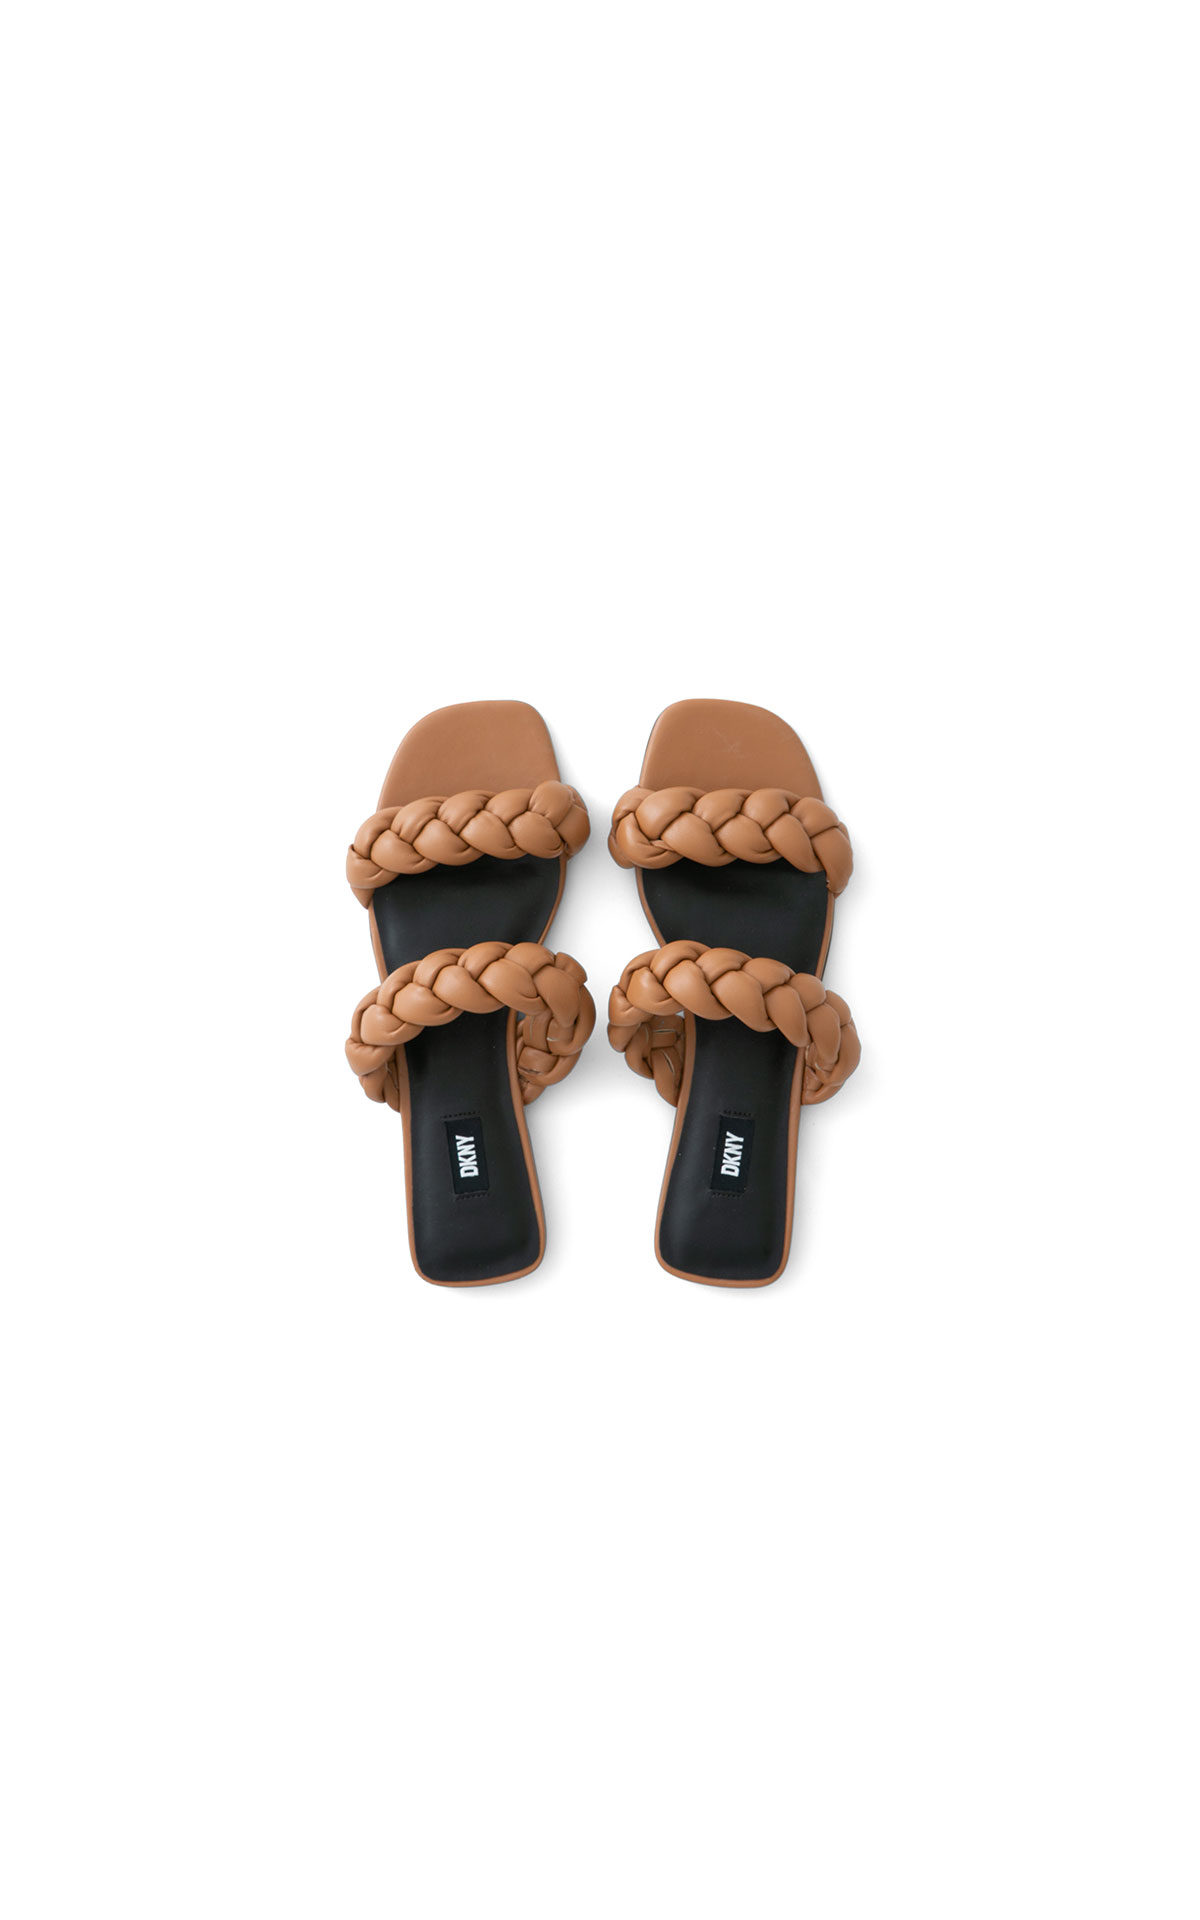 DKNY Braided double strap sandal from Bicester Village